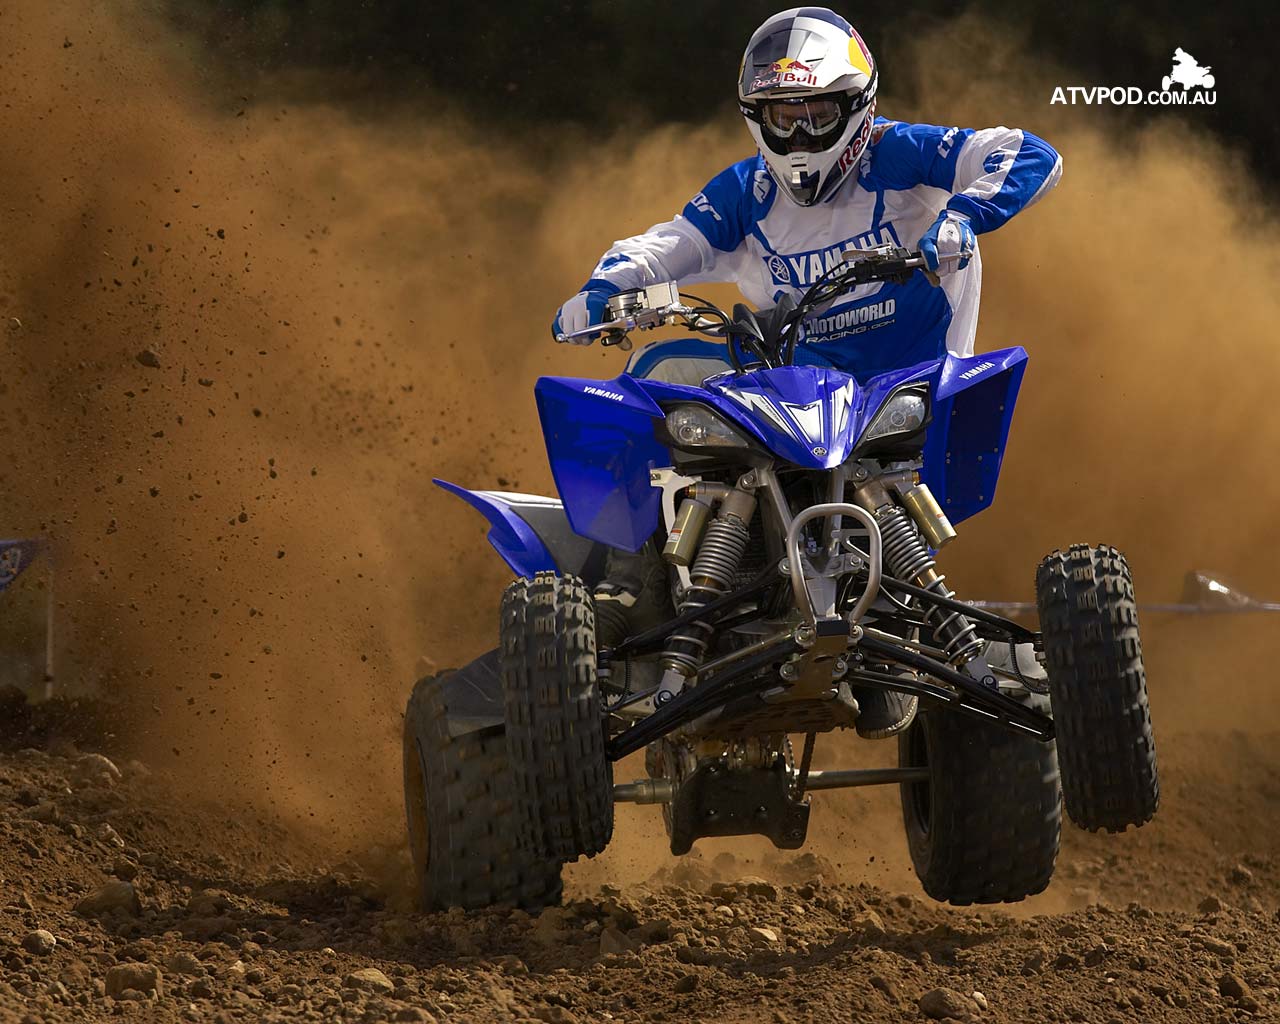 Yamaha Yfz 450 Backgrounds, Compatible - PC, Mobile, Gadgets| 1280x1024 px